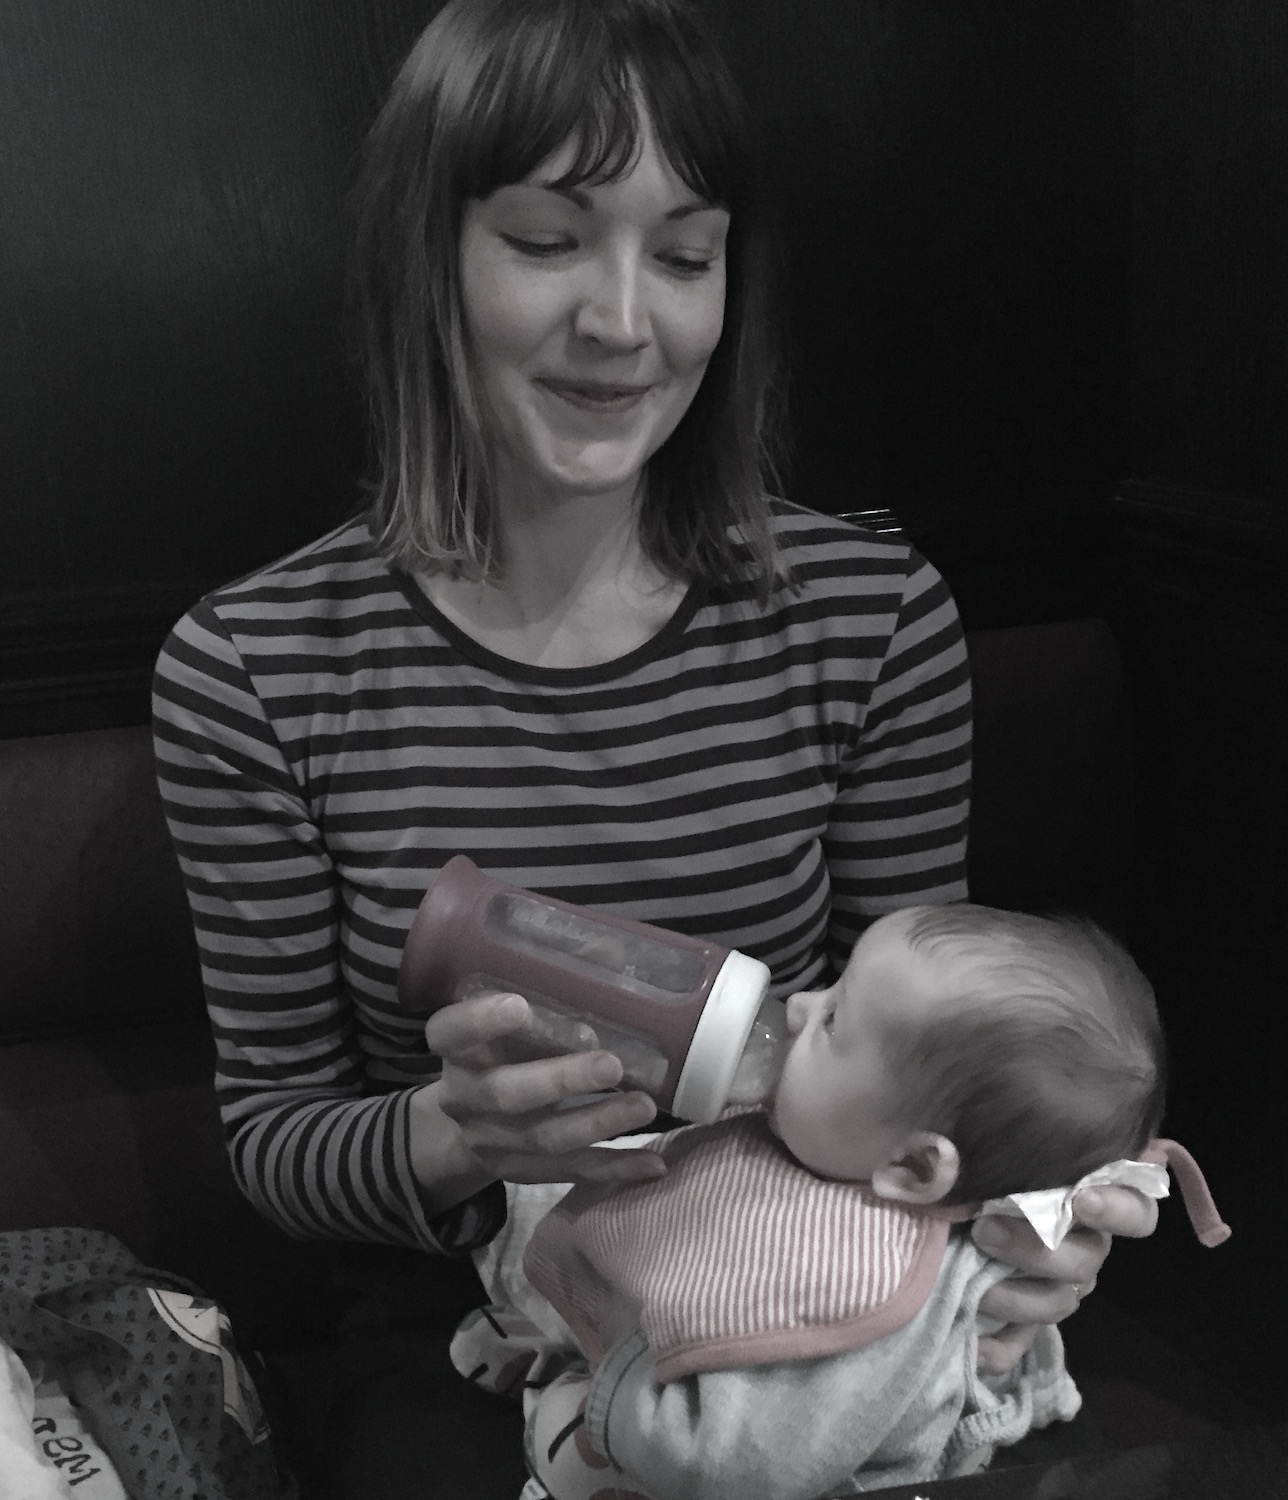 with a baby in a restaurant